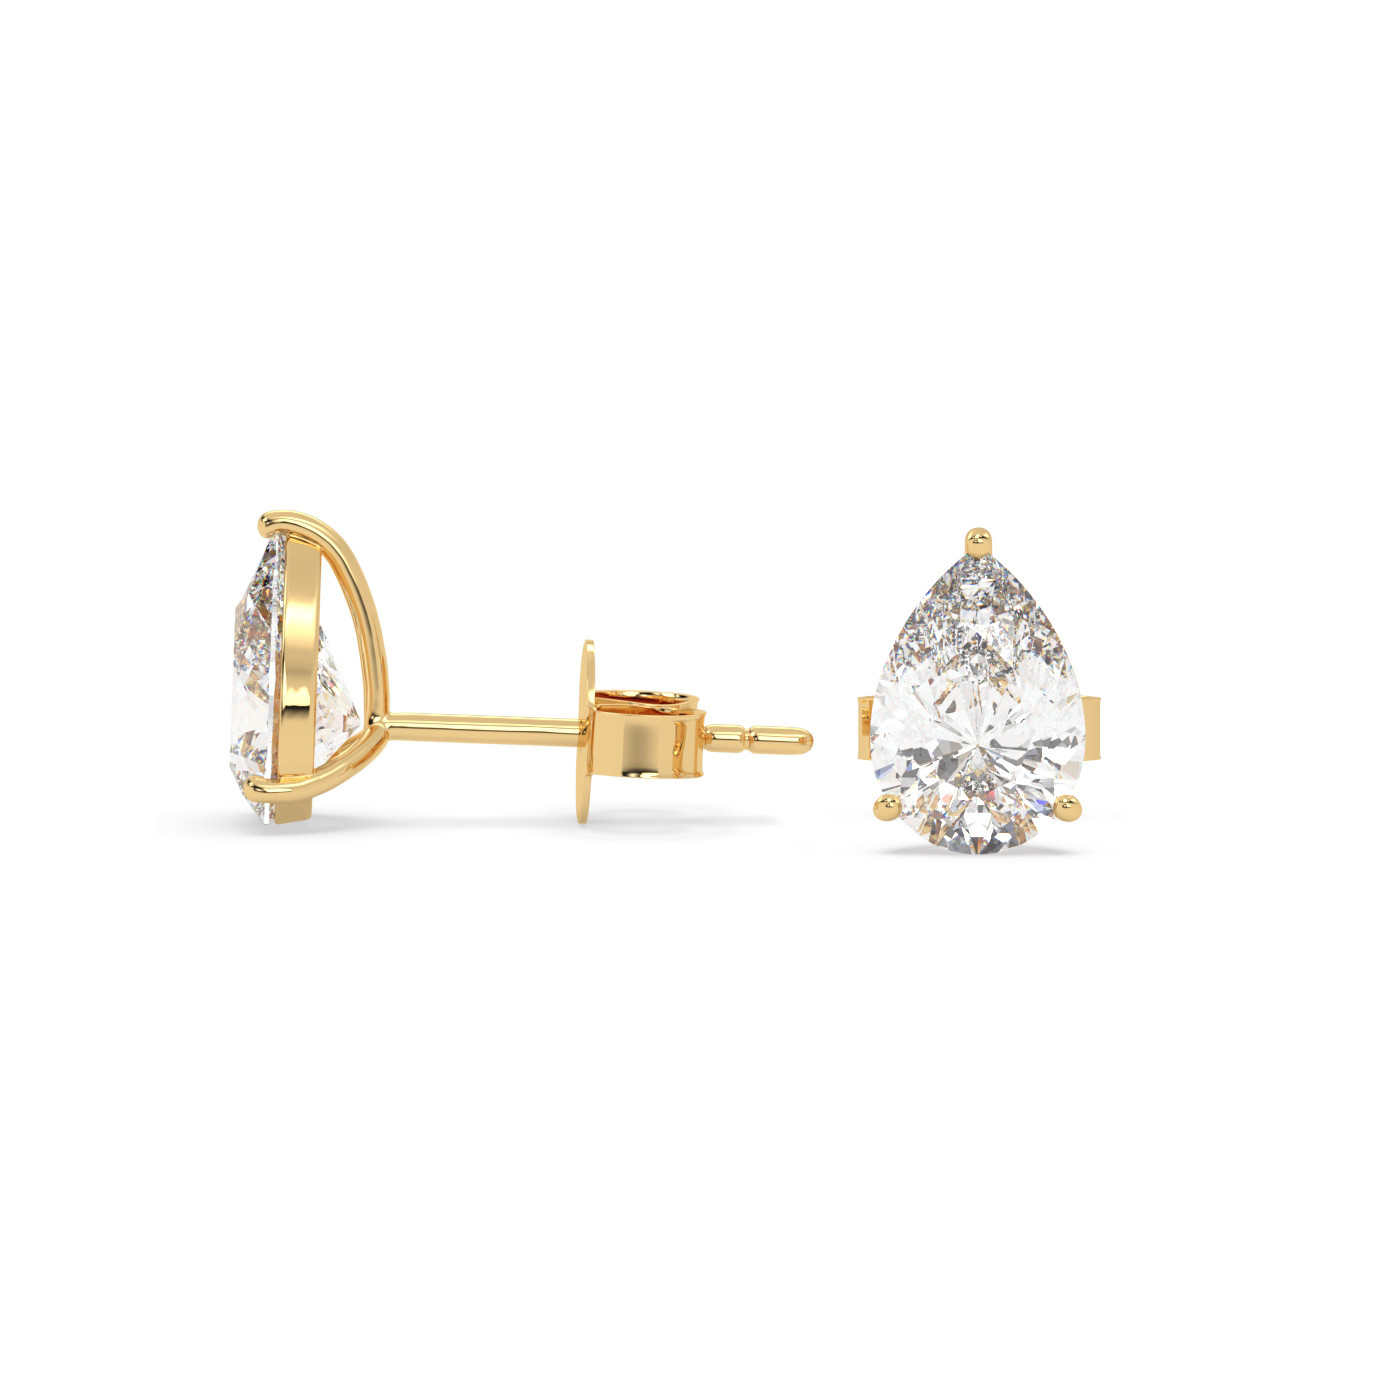 18k yellow gold  1.0 carat pear stud earrings with butterfly back